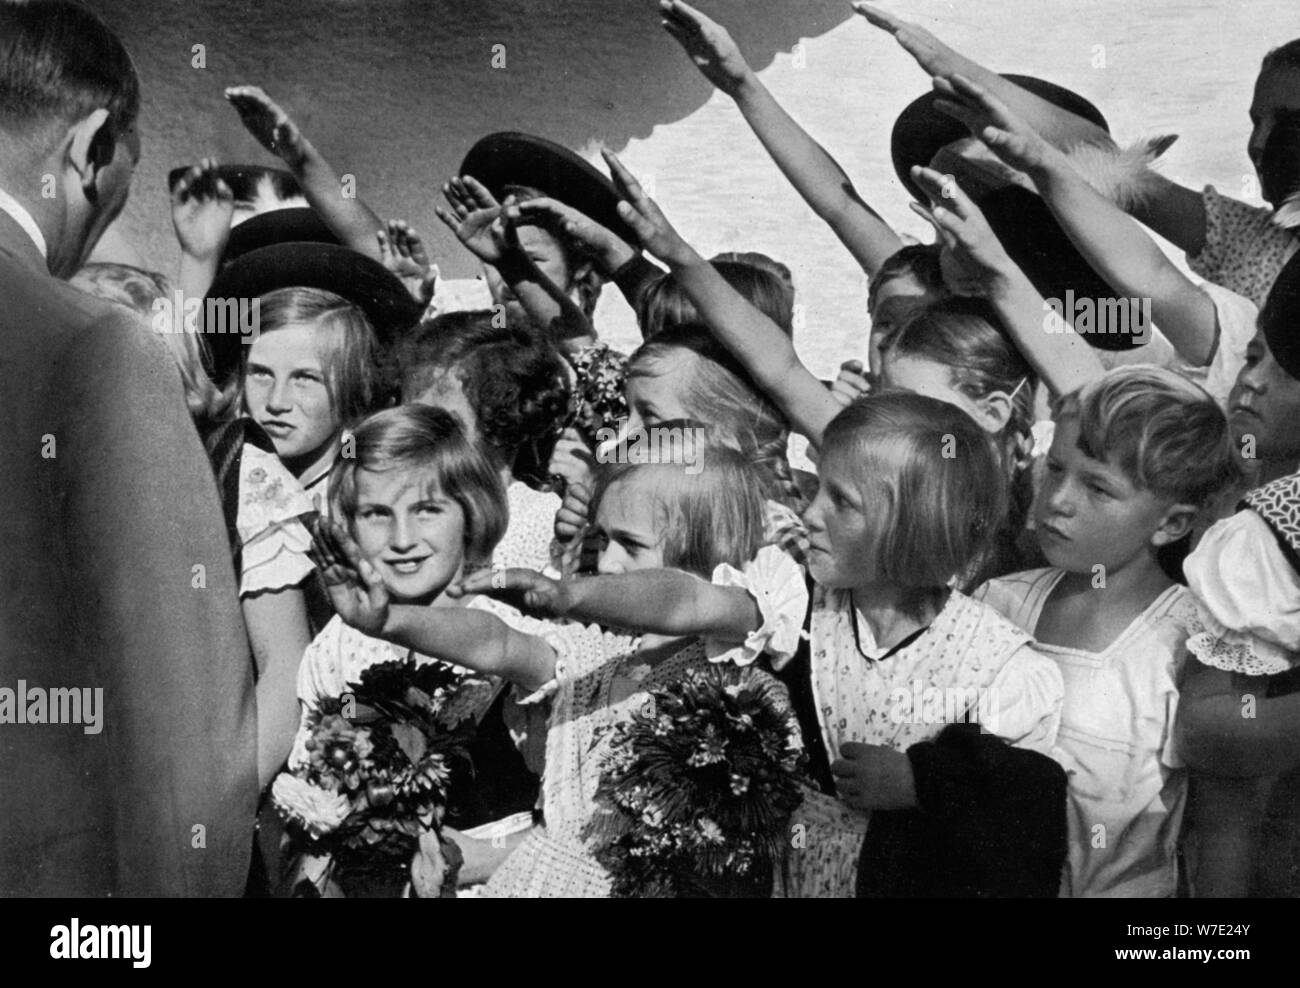 adolf-hitler-with-a-group-of-young-children-1936-artist-unknown-W7E24Y.jpg